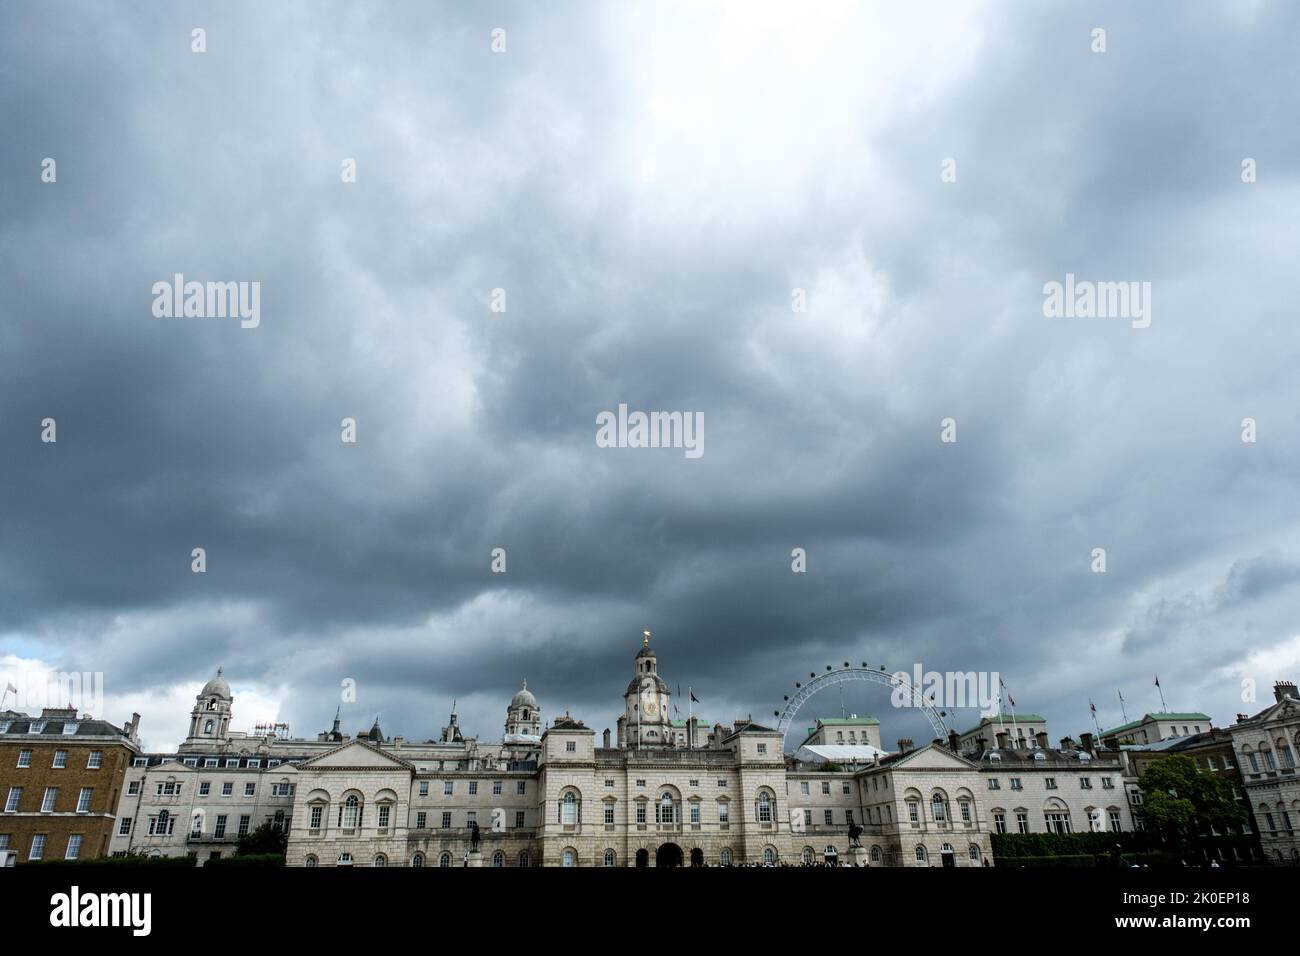 City of Westminster London, UK, September 10 2022, Horse Guards Building Exteriors Under Grey Storm Clouds With People Walking On Parade Ground Stock Photo